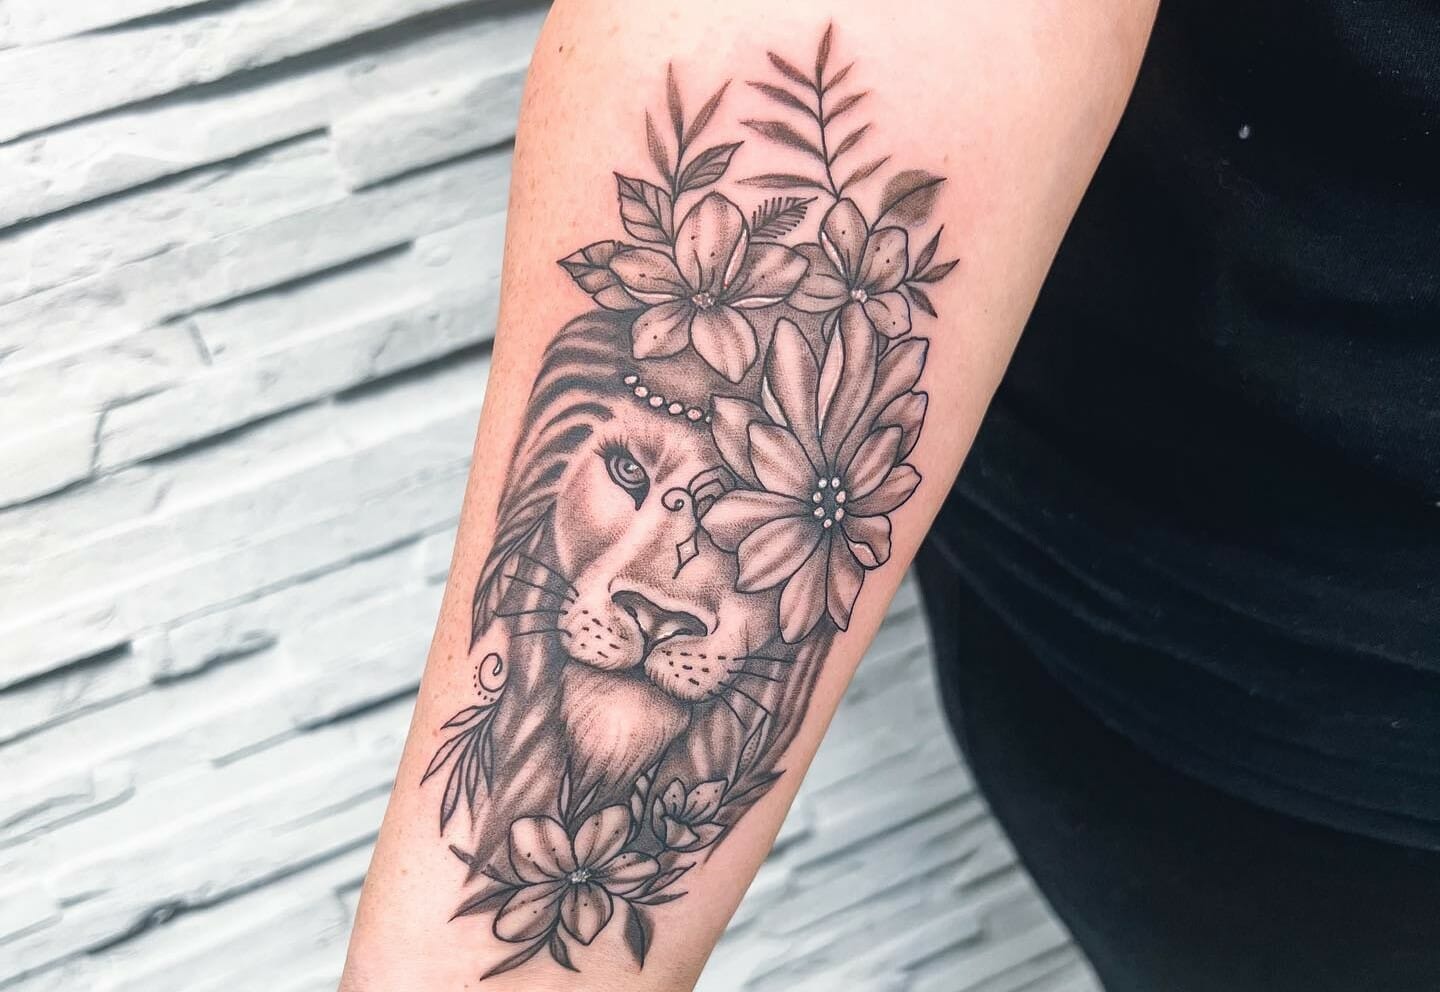 101 Best Lion With Flowers Tattoo Ideas That Will Blow Your Mind! Outsons